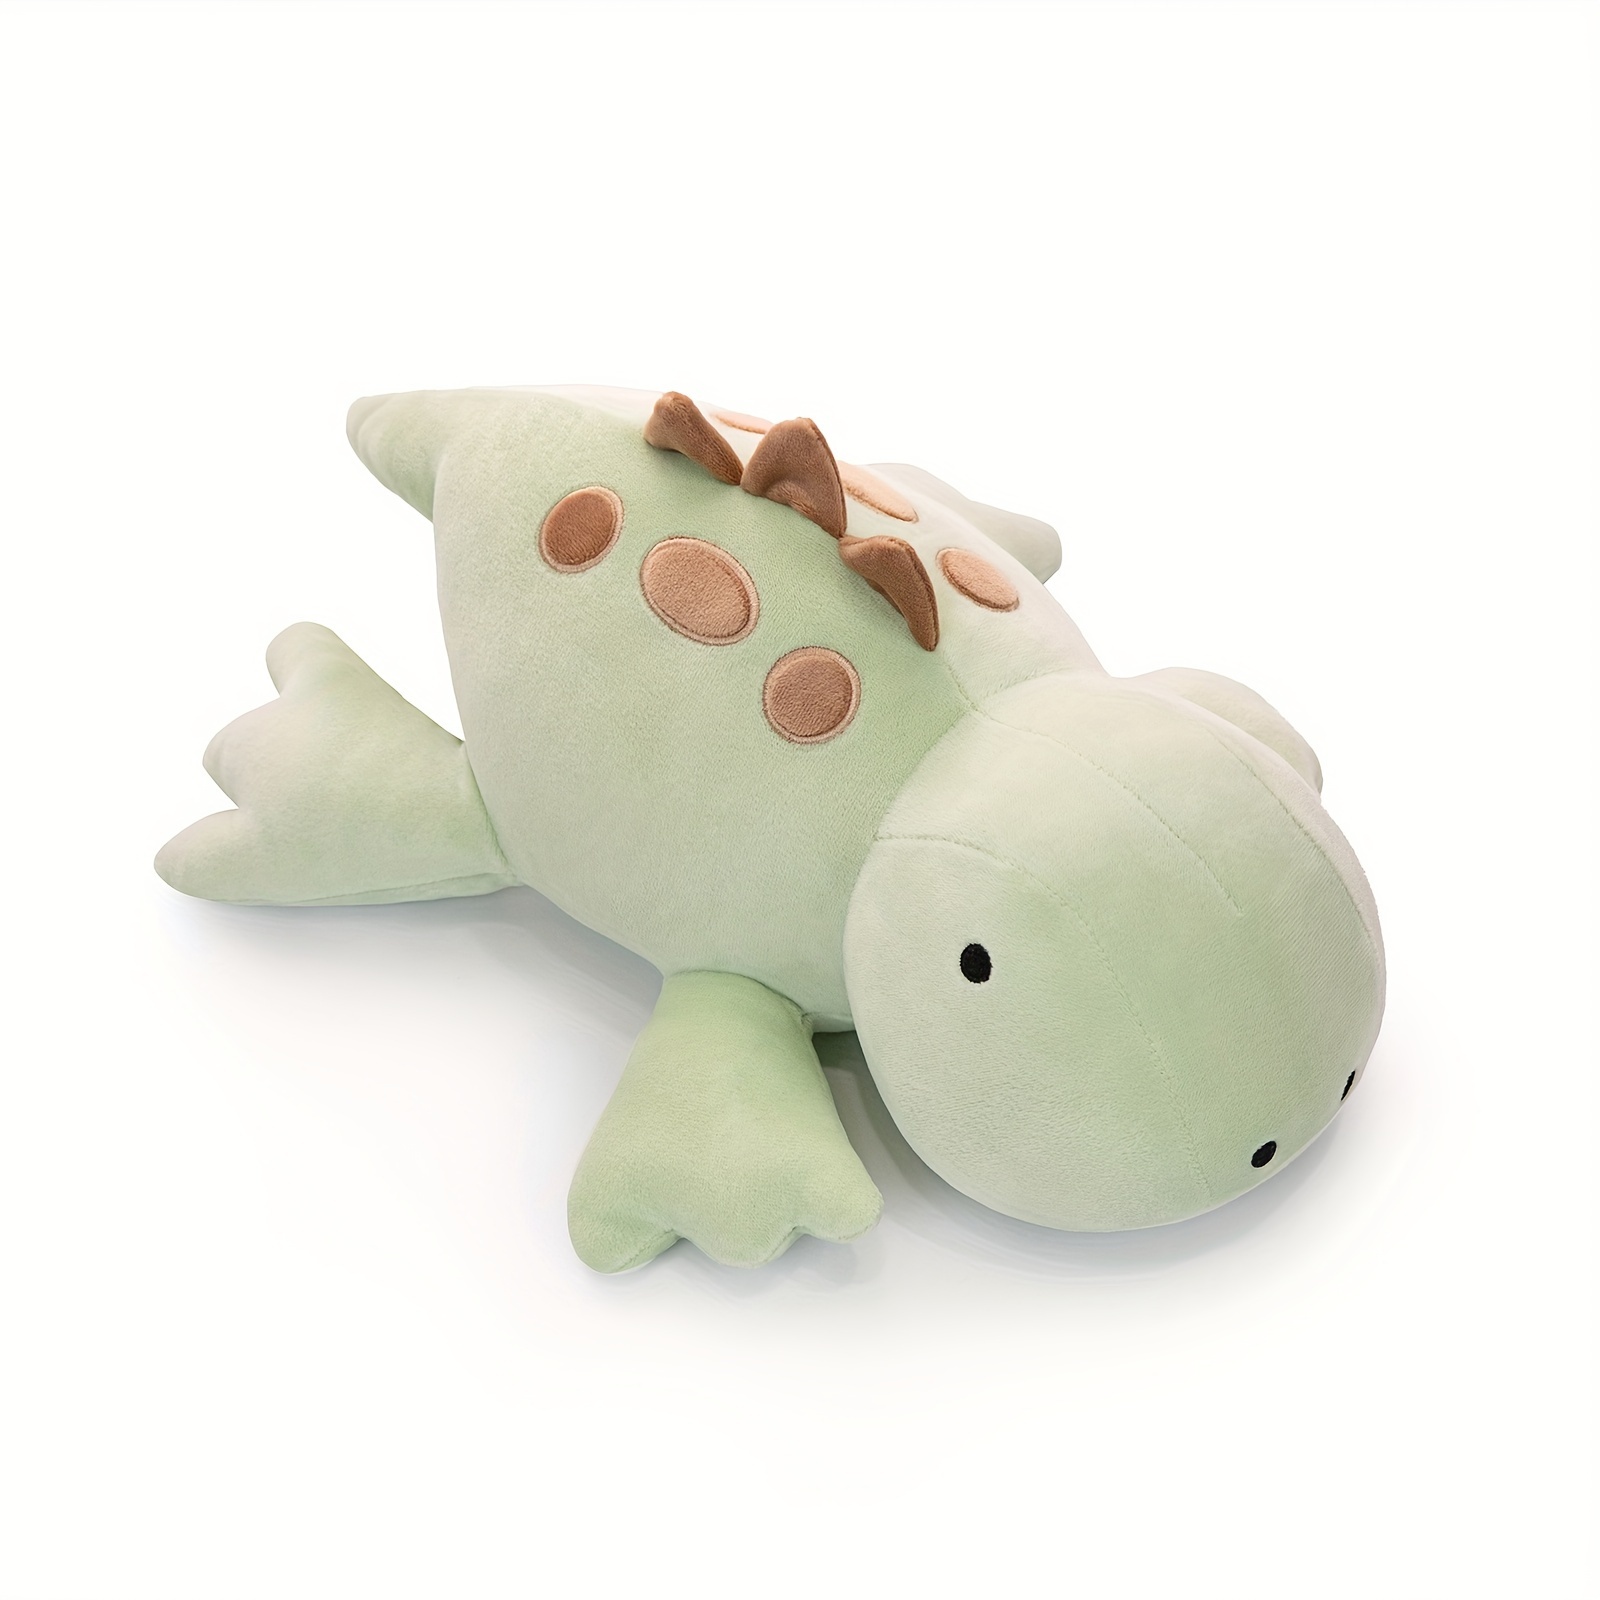 603.28g Weighted Dino Plush Toys, 100% Cotton Filled Particles Dinosaur  Weighted Stuffed Animal For Anxiety Soft Comfort Plush Teddy Bear Sleeping  Plush Toy Christmas Halloween Gift For Adult